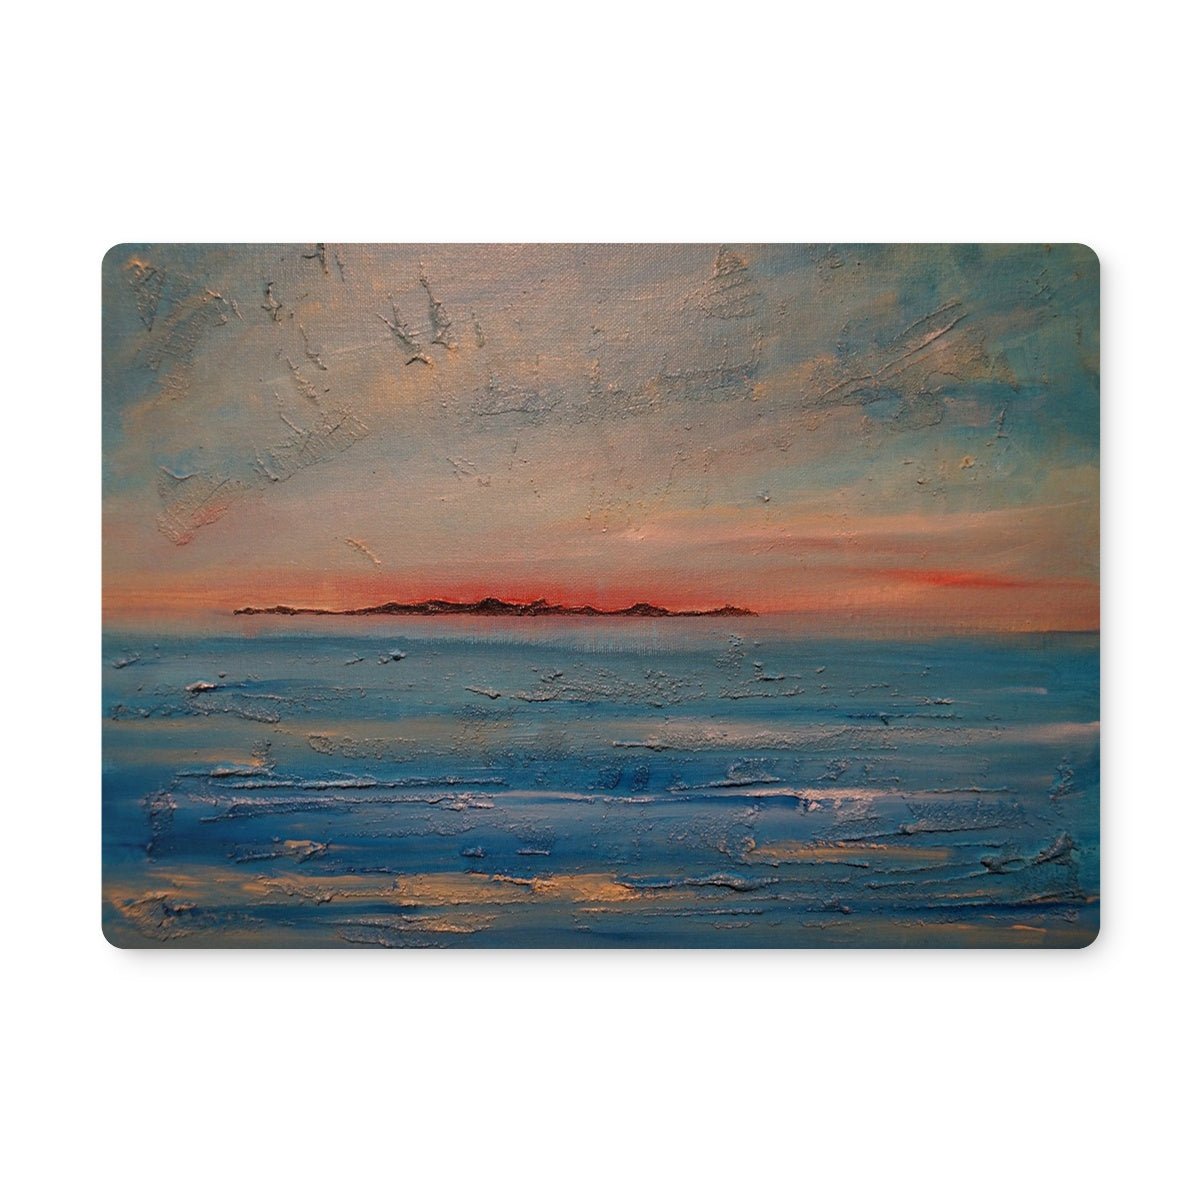 Gigha Sunset Art Gifts Placemat-Placemats-Hebridean Islands Art Gallery-4 Placemats-Paintings, Prints, Homeware, Art Gifts From Scotland By Scottish Artist Kevin Hunter